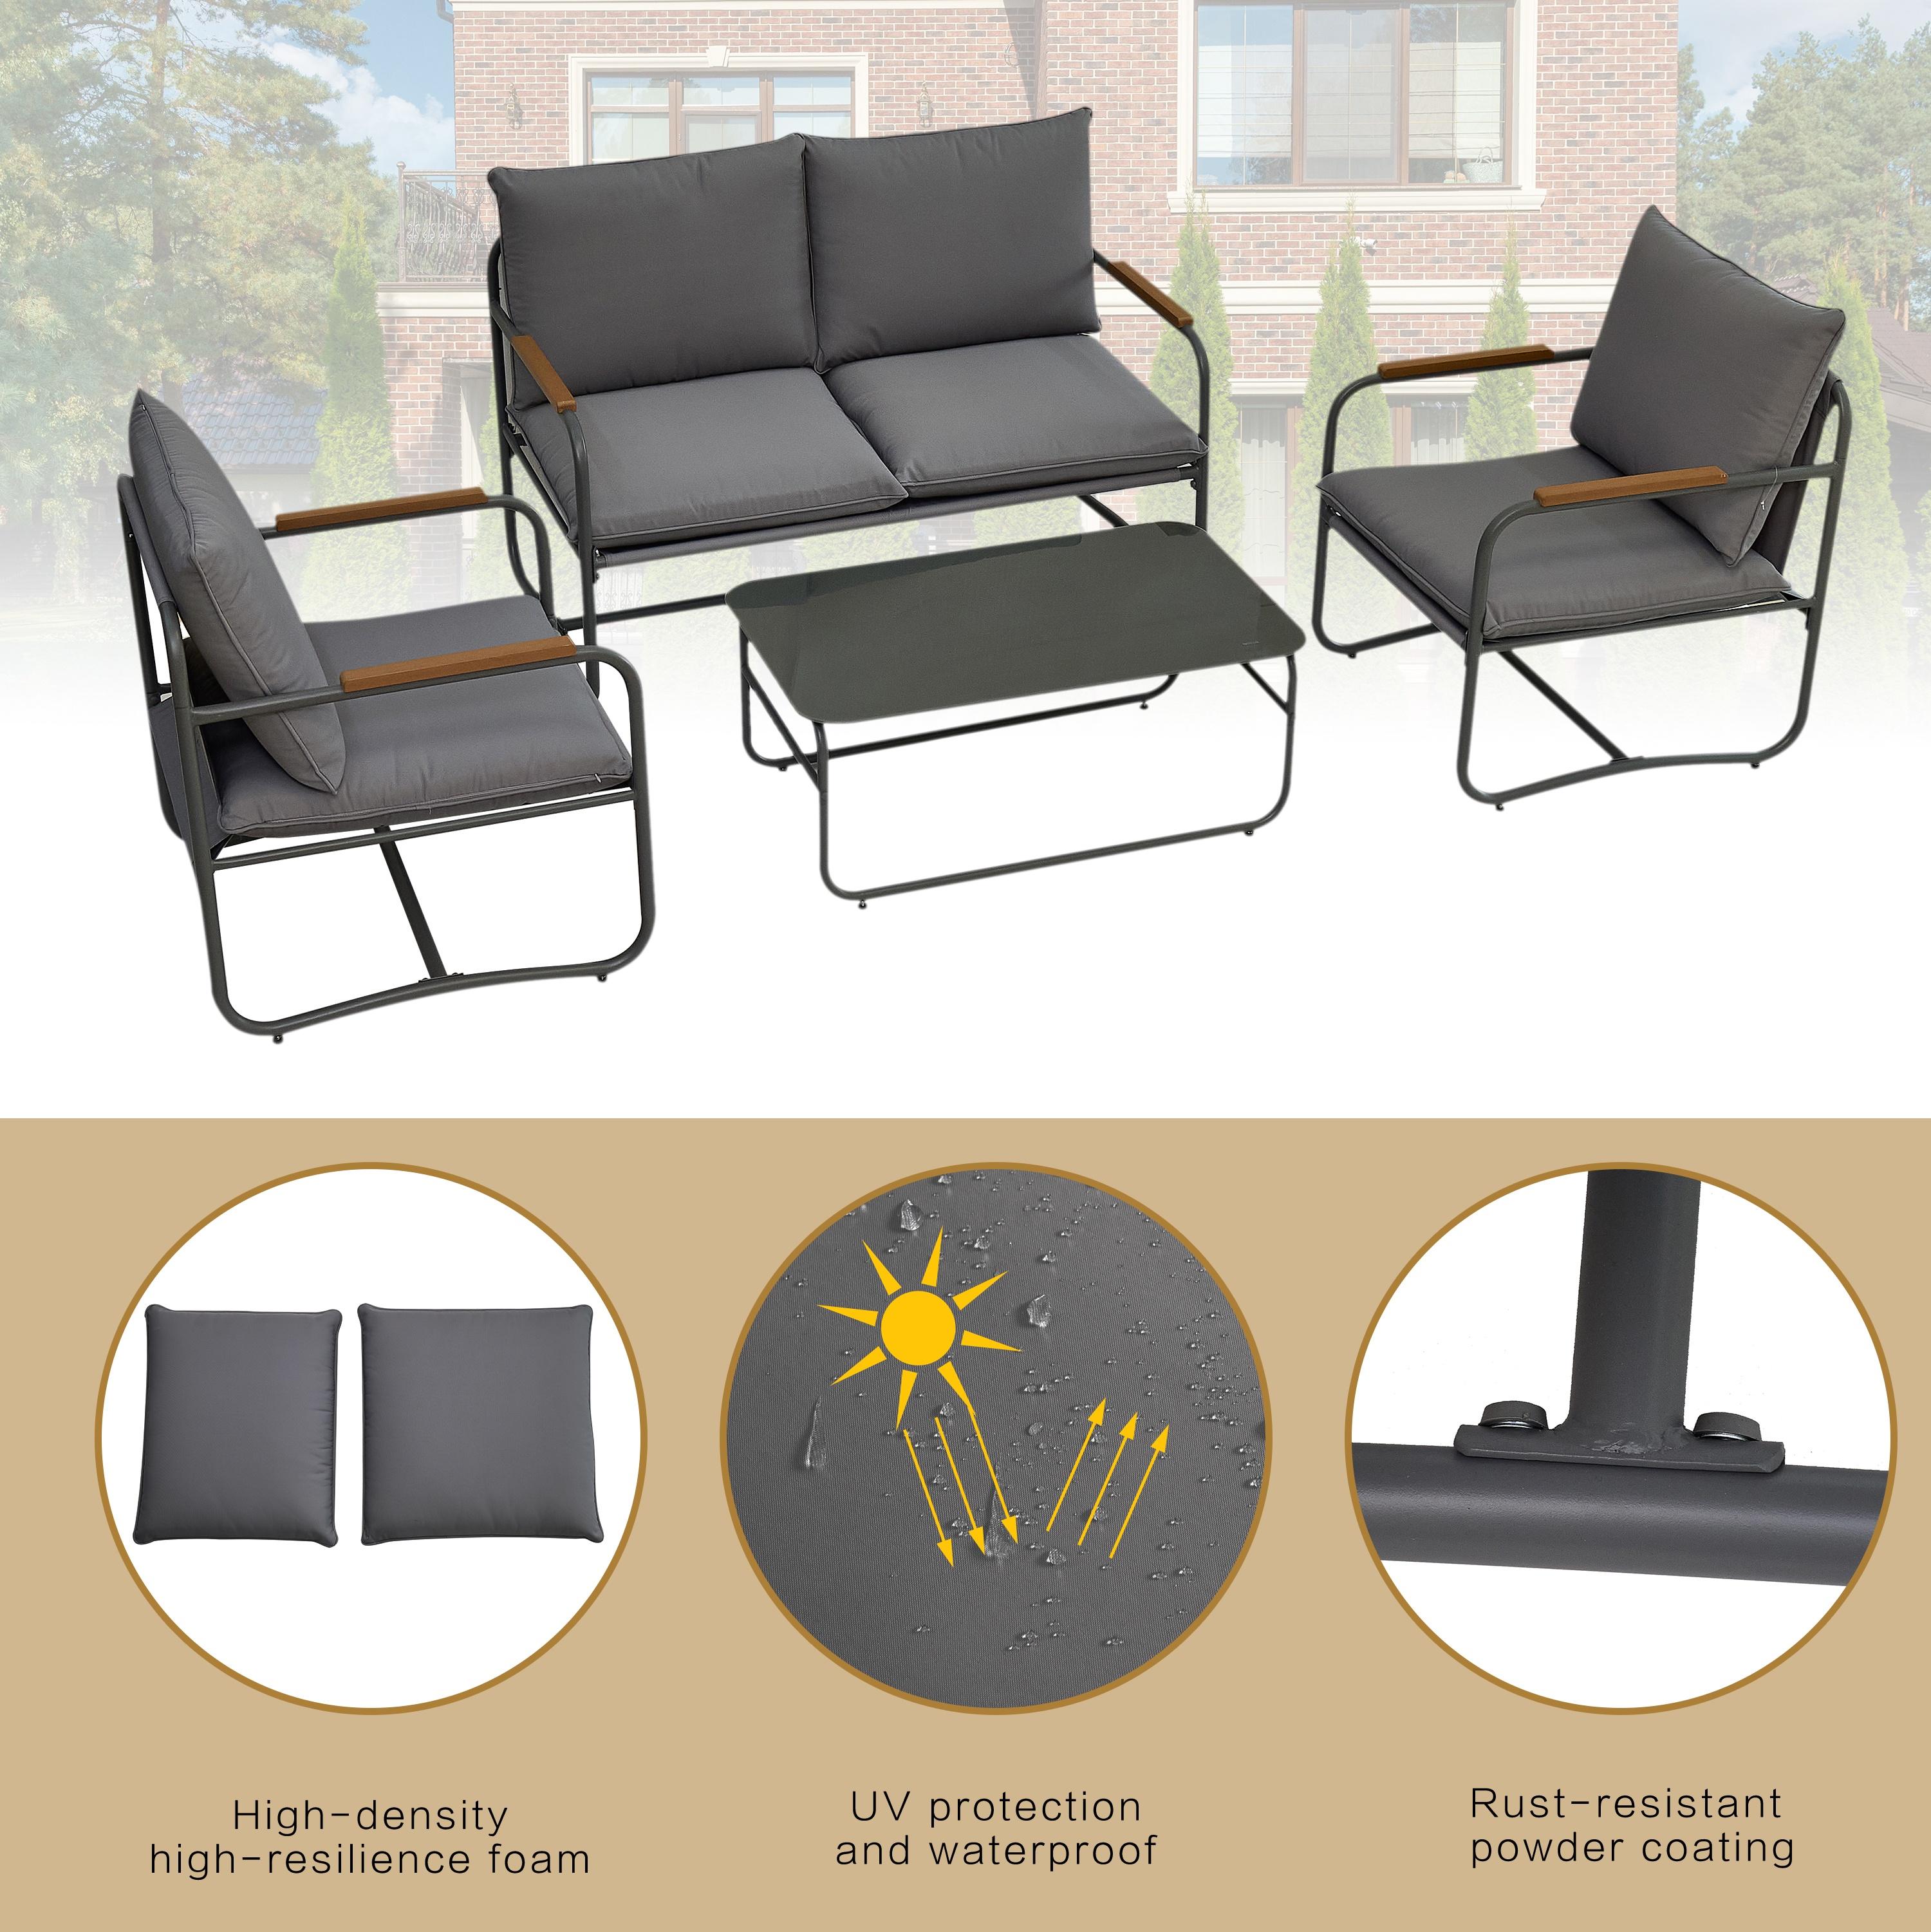 Syngar 4 Piece Patio Furniture Sets, Sectional Furniture Set for Outside, Conversation Sofa Set with Coffee Table and Dark Gray Cushions, Outdoor All Weather Metal Chairs Set for Yard, Poolside, Deck - image 3 of 7